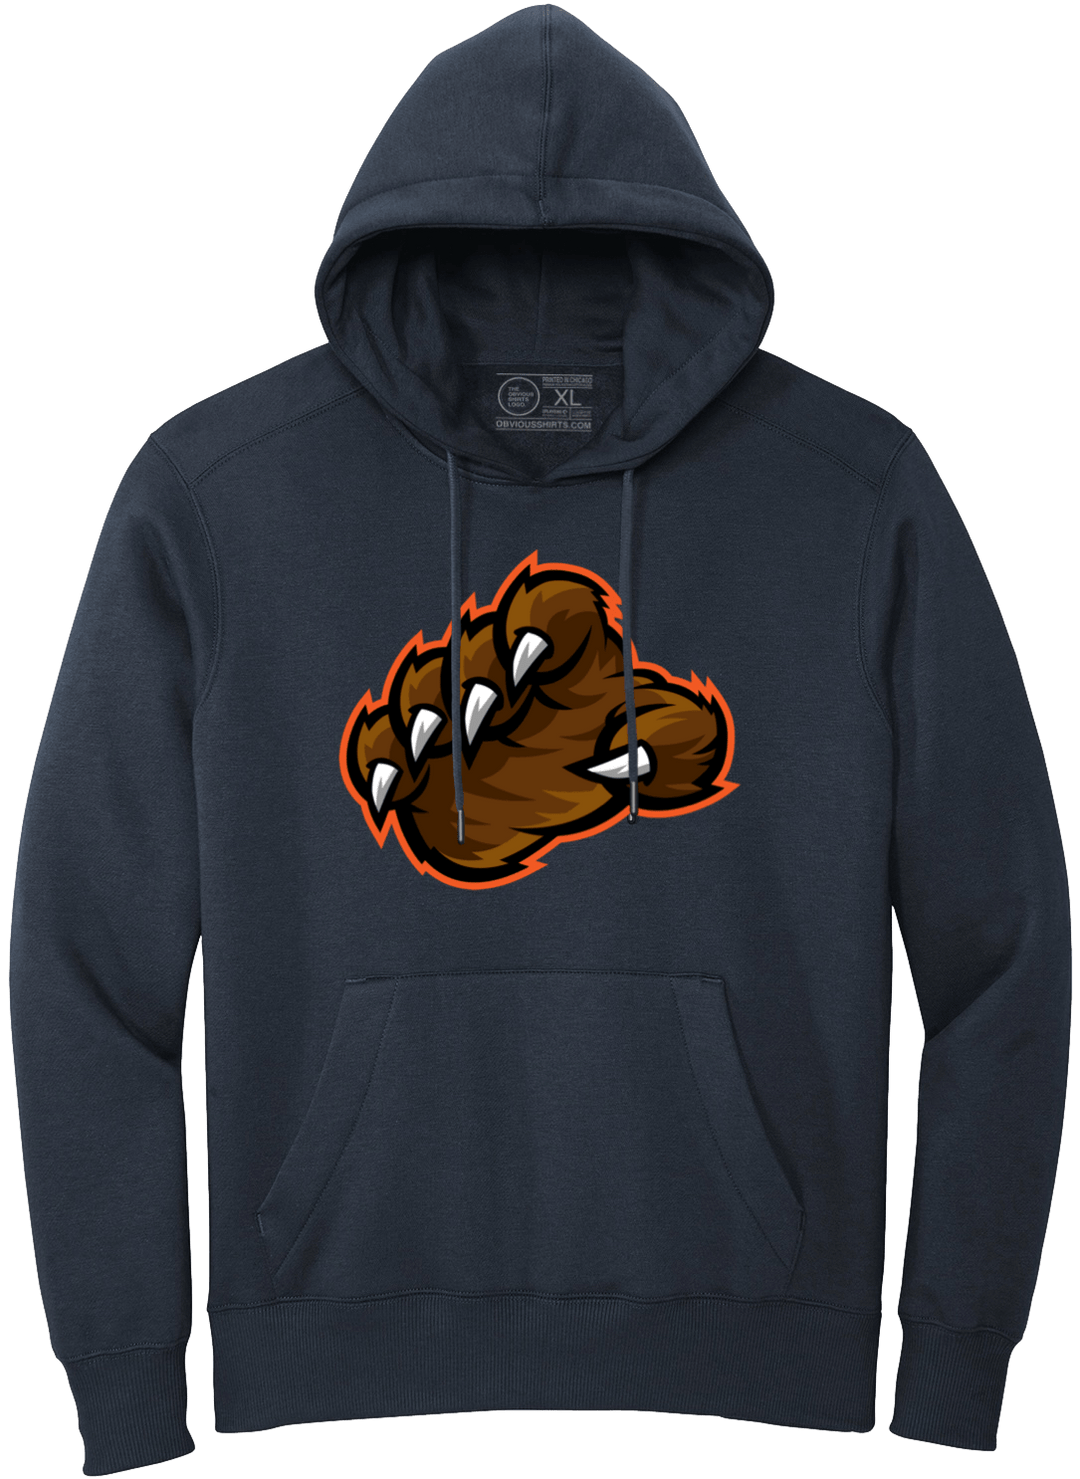 THE CLAW (HOODED SWEATSHIRT - OBVIOUS SHIRTS